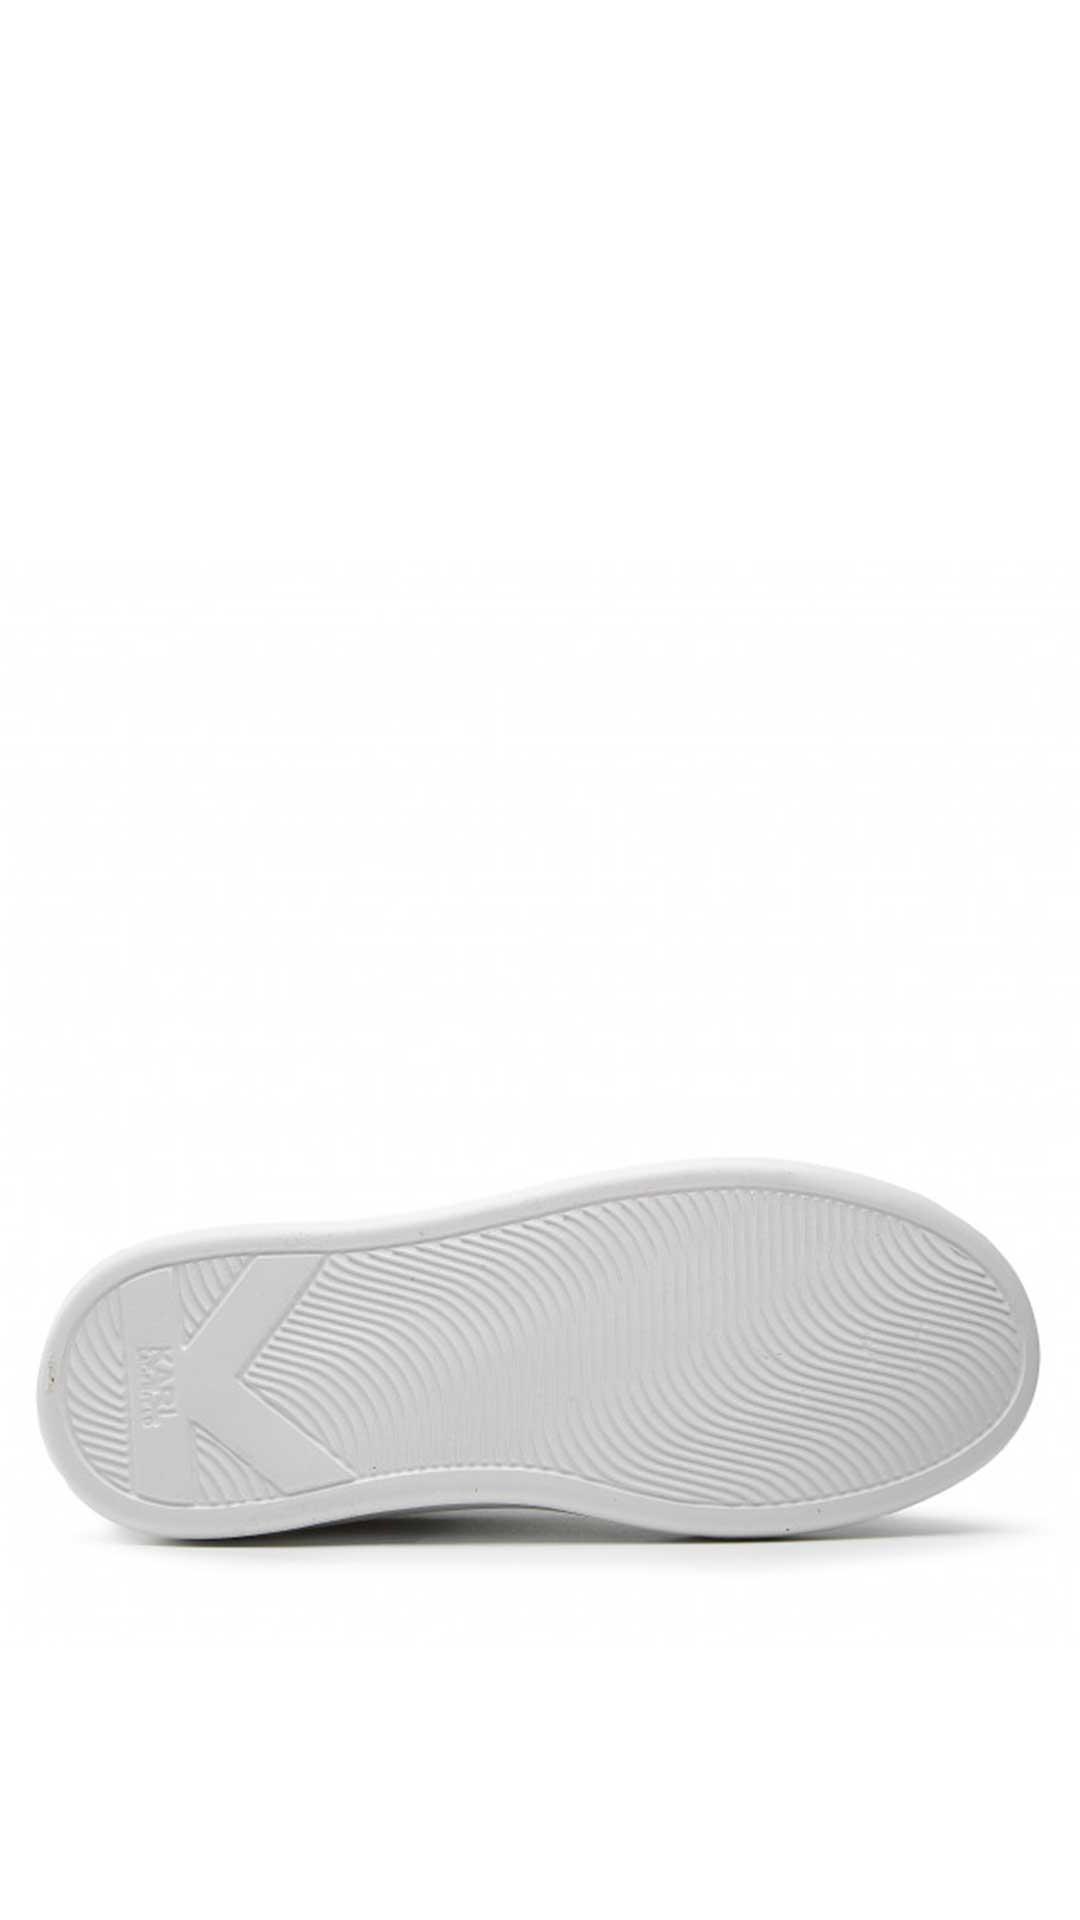 Karl Lagerfeld Sports With Laminated Effect in White for Men Mens Shoes Trainers Low-top trainers 